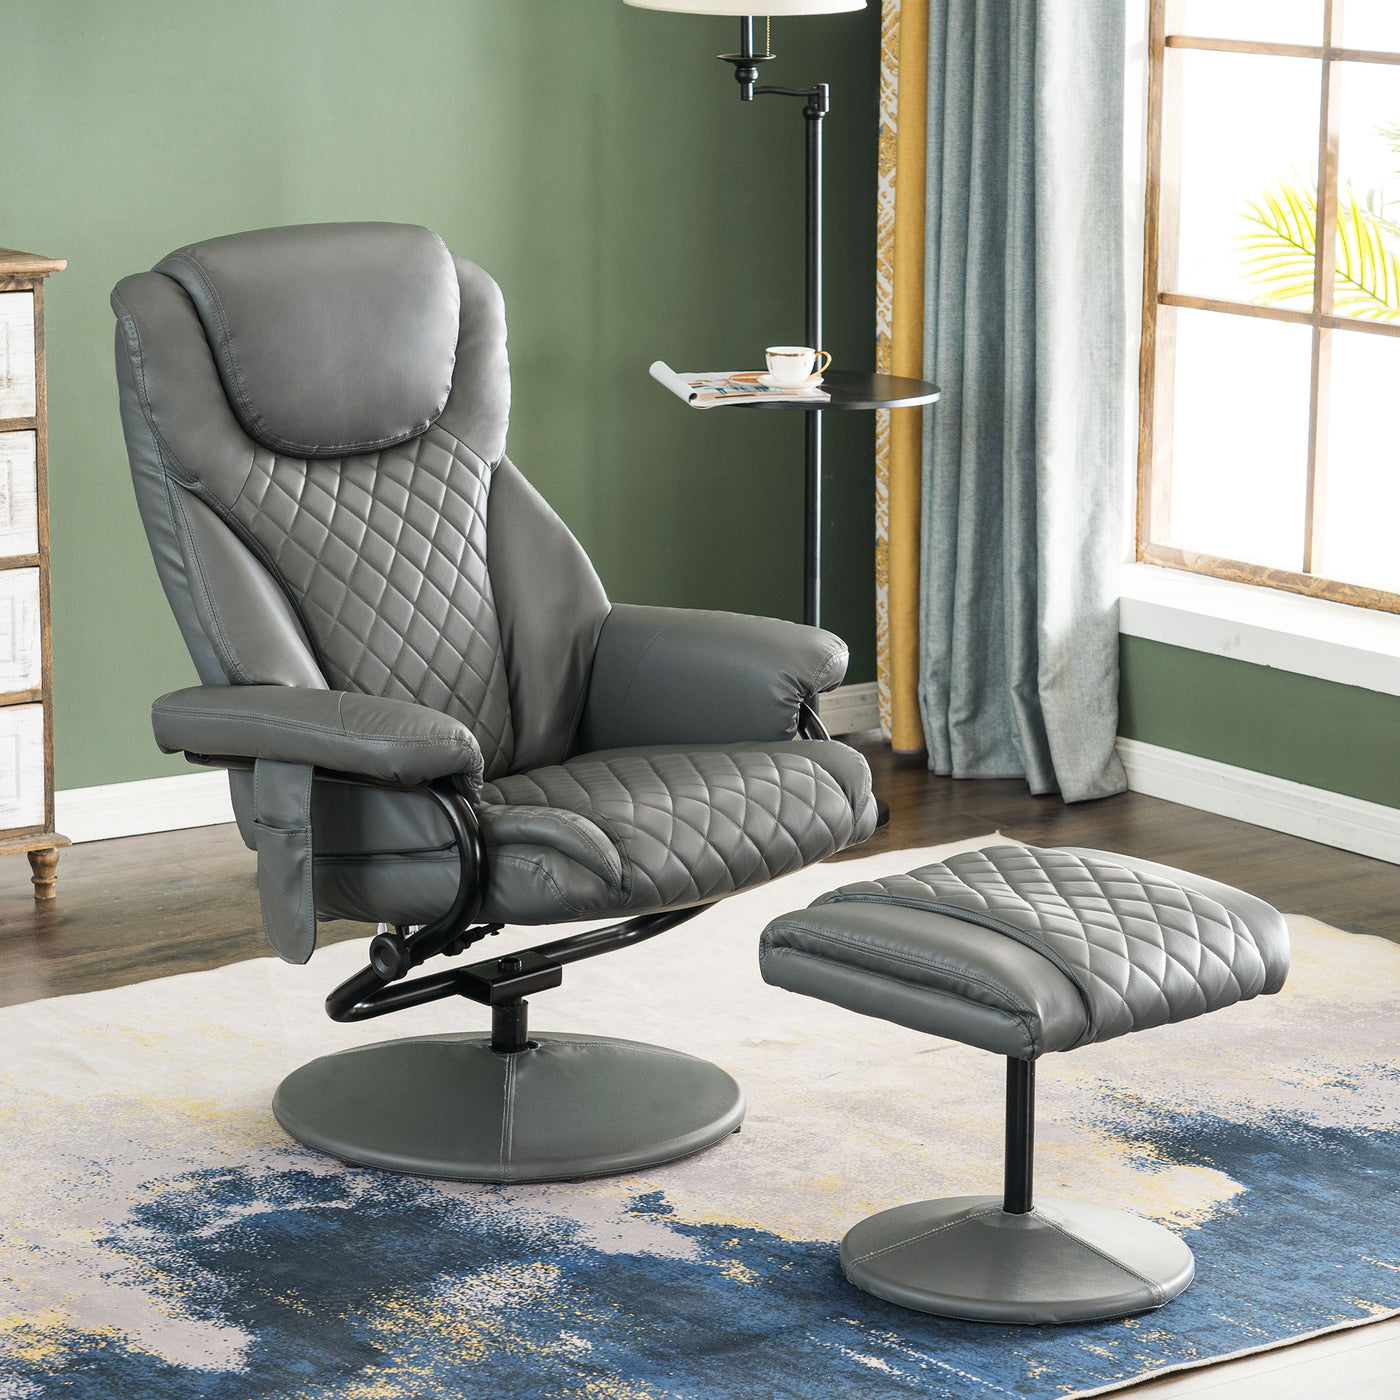 Mcombo Recliner with Ottoman, Reclining Chair with Massage, 360 Swivel